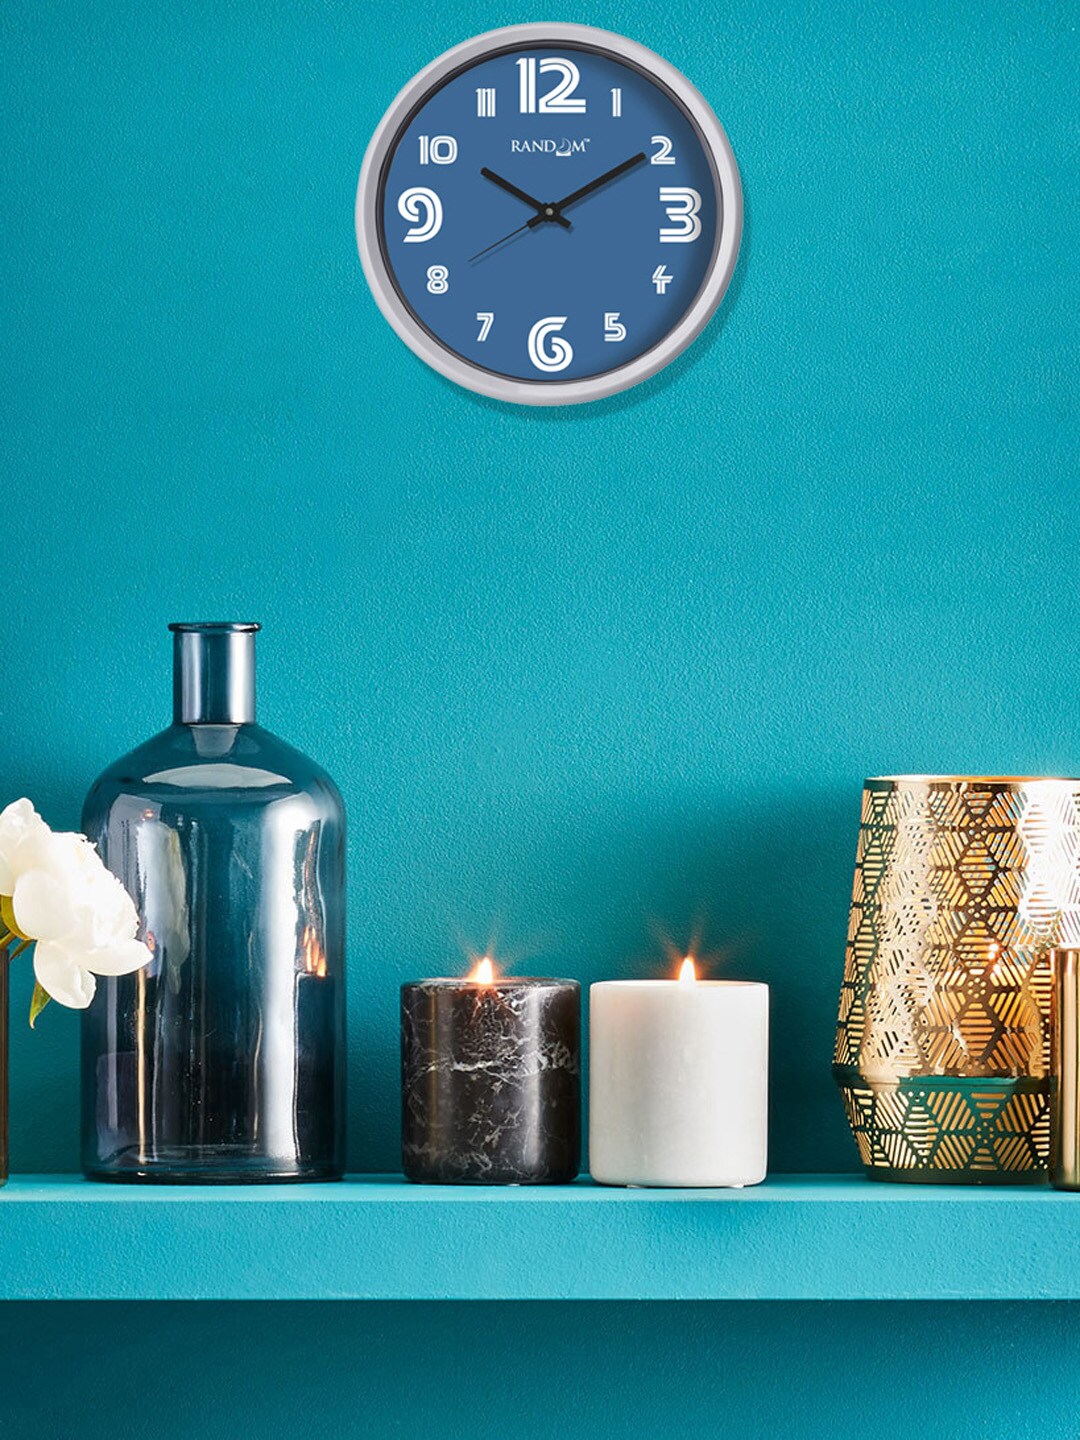 RANDOM Blue Round Solid Analogue Wall Clock Price in India